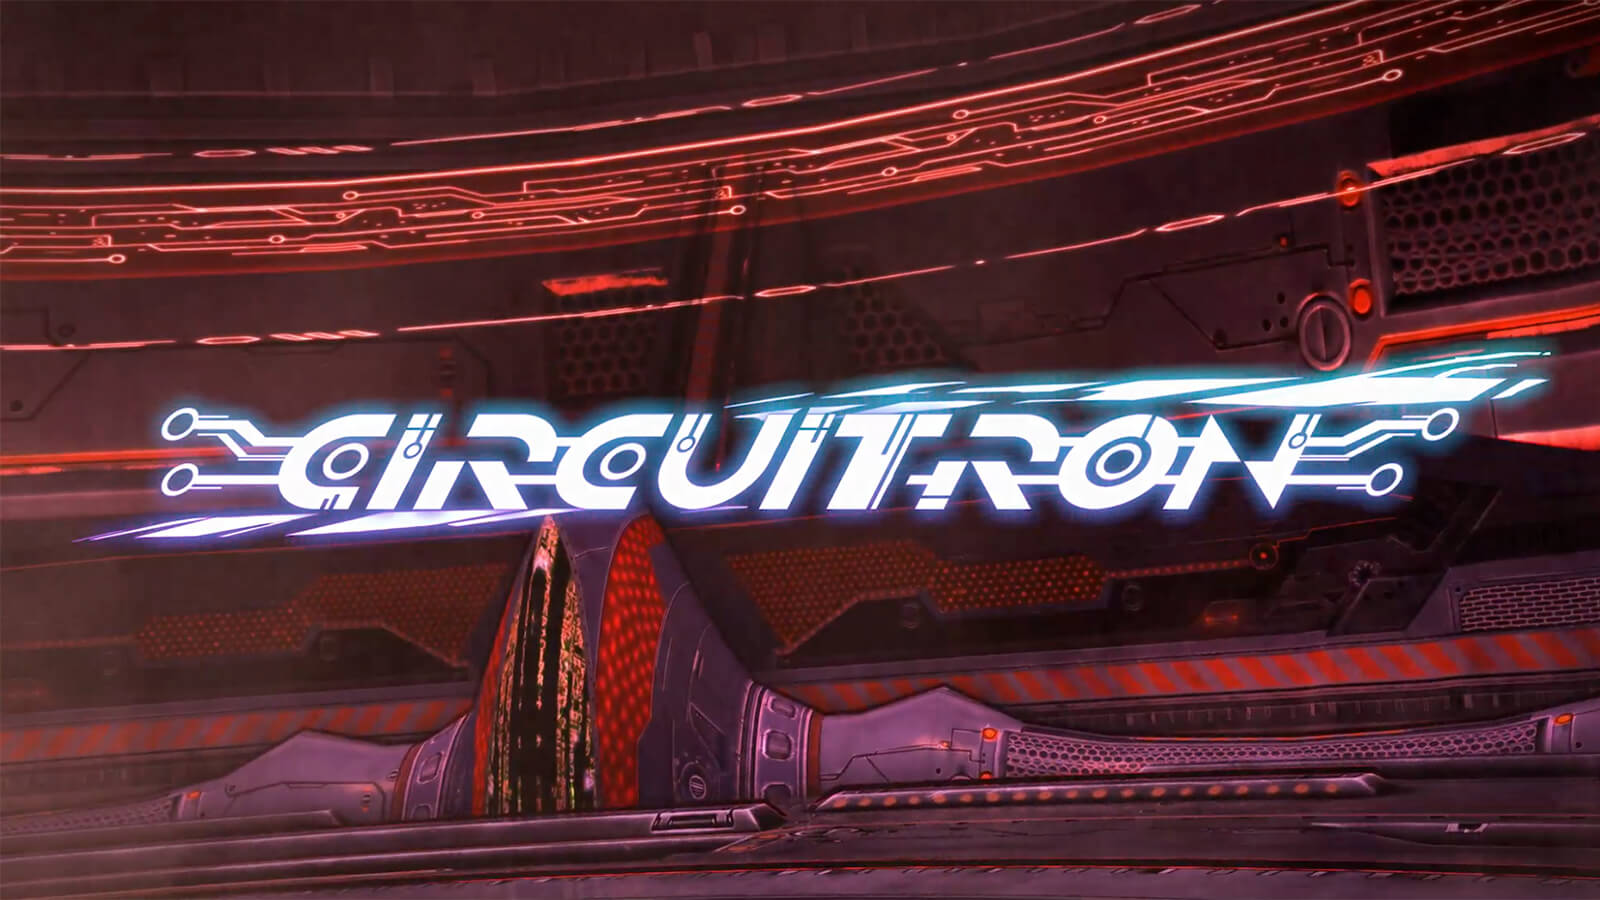 Title card for the film Circuitron in glowing, white stylized font in front of a reddish-hued metallic room